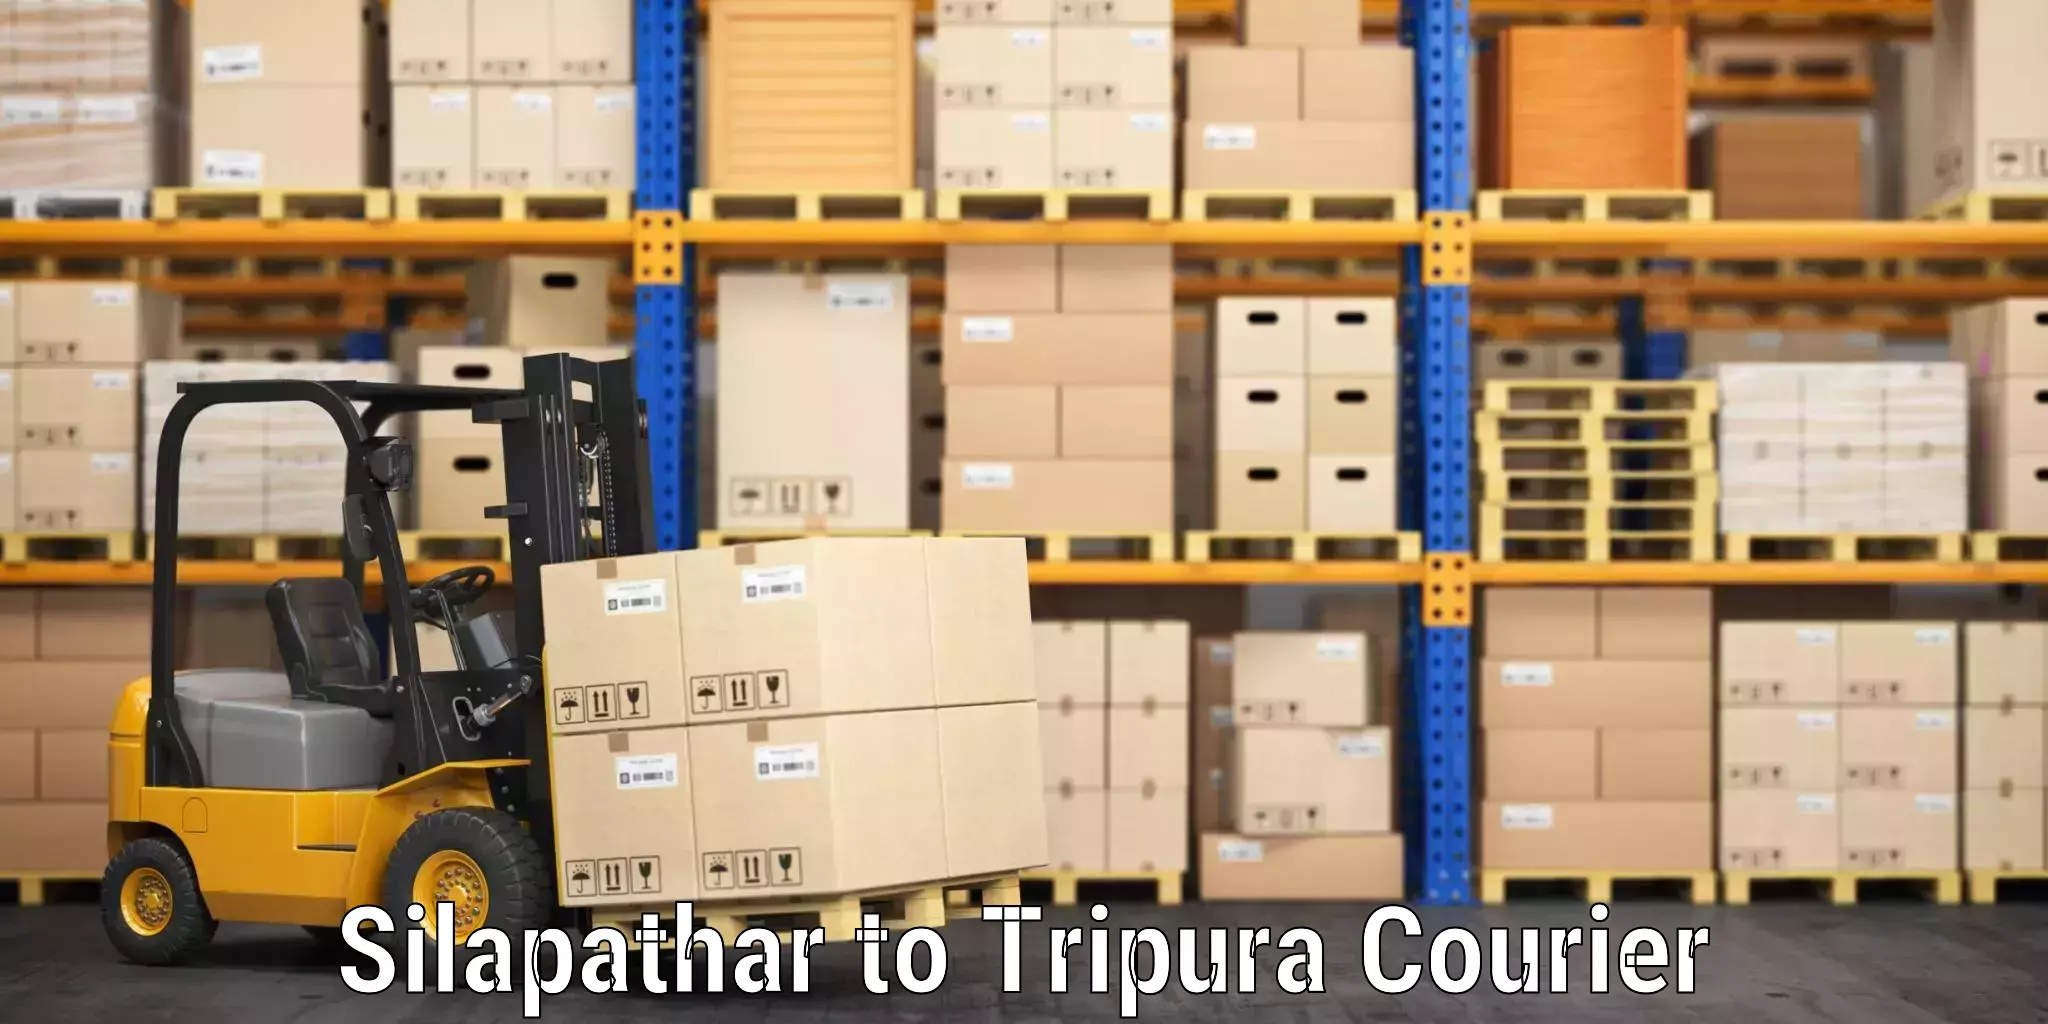 Luggage shipment specialists Silapathar to Udaipur Tripura